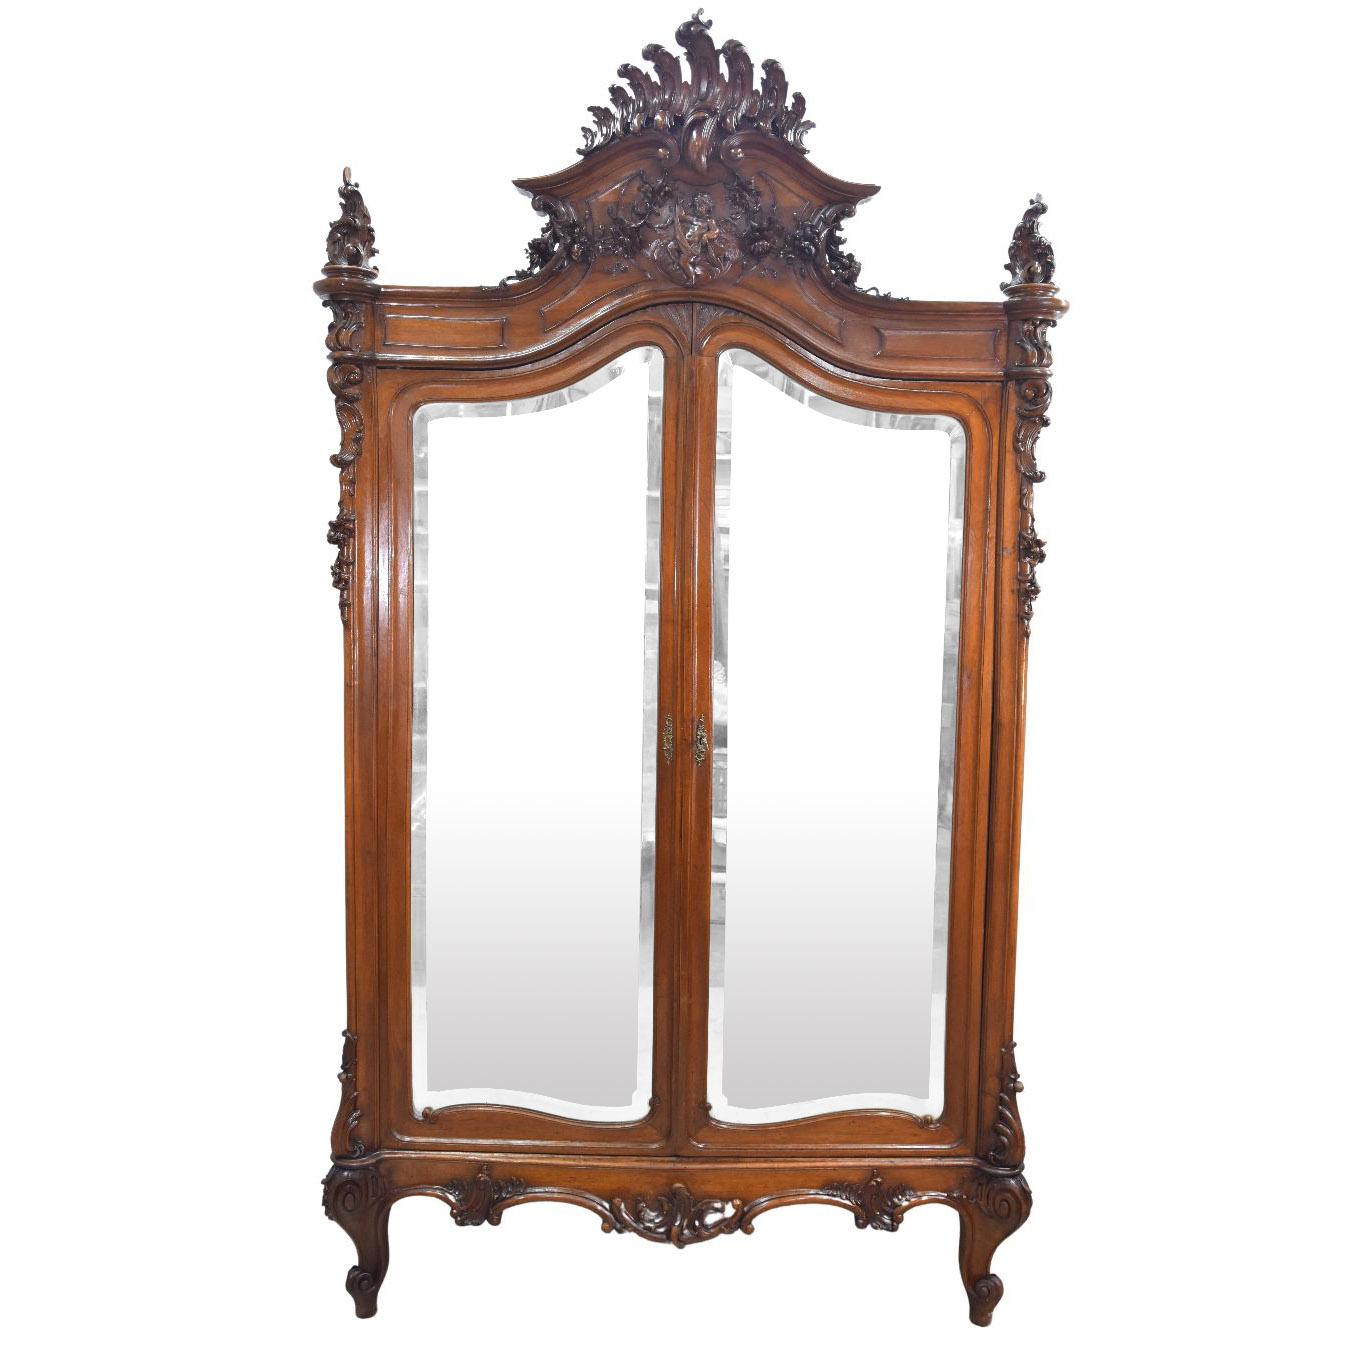 19th Baroque Louis XV Rococo style mirror cabinet in walnut with putti with 2 richly carved doors dimension height 265 cm for a width of 165 cm and depth of 55 cm. Part of a set including a wardrobe a bed a pair bedside tables and a dressing table.